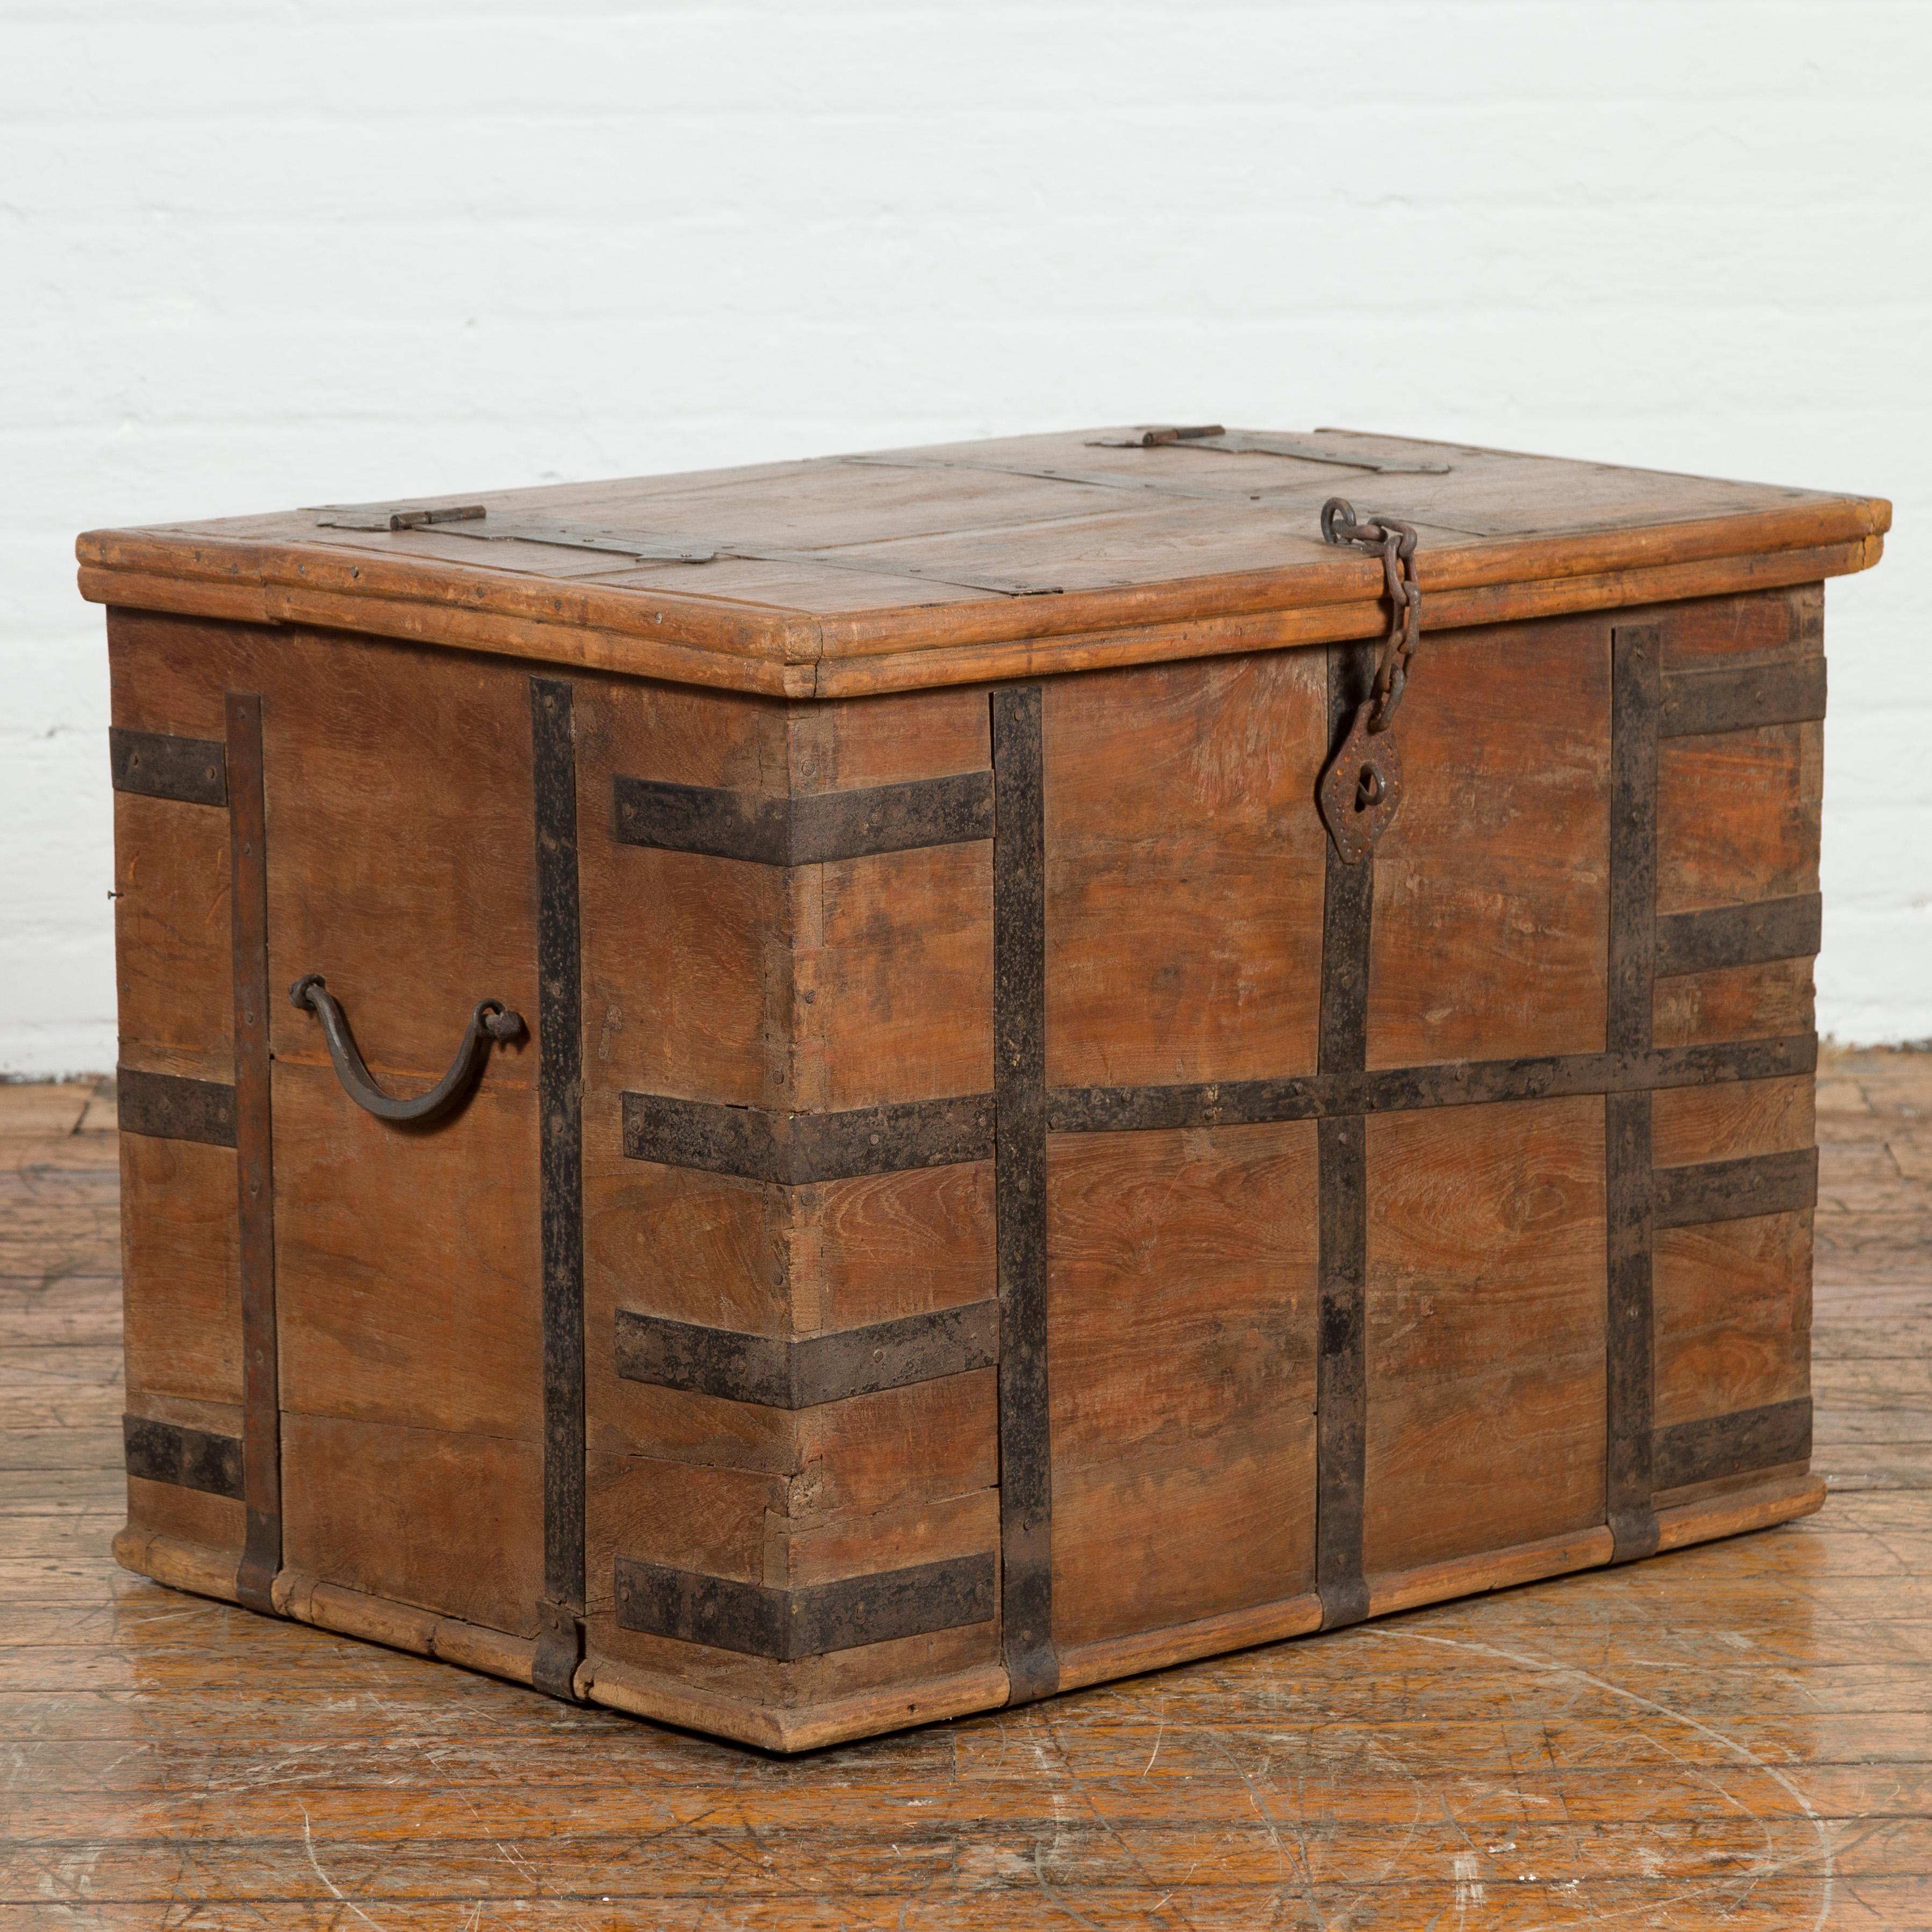 An Indian rustic wooden trunk from the 19th century with iron hardware and nicely weathered patina. Created in India during the 19th century, this wooden trunk features a rectangular top partially opening to reveal an interior offering convenient